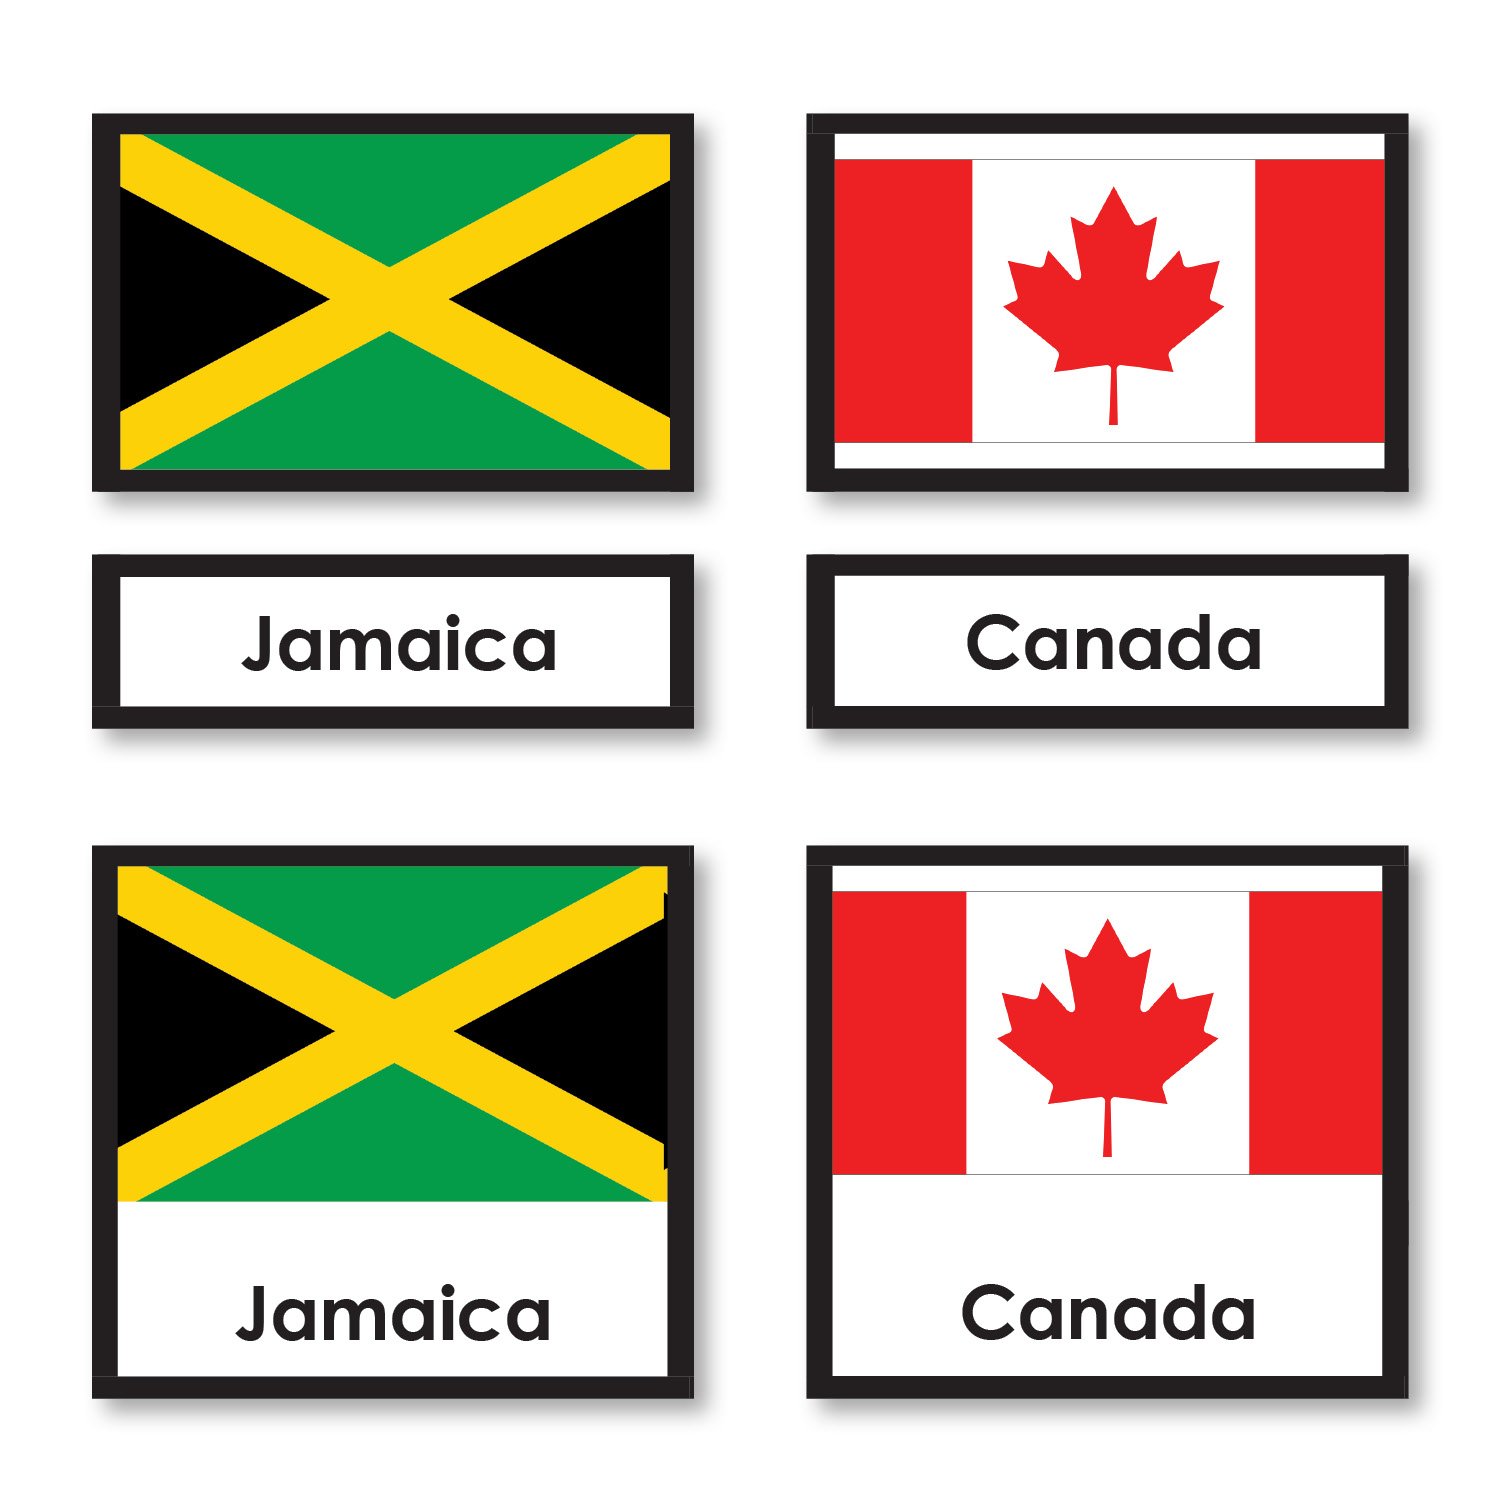 Geography Material-Flags, Maps & Globes - World Flags 3-Part Cards